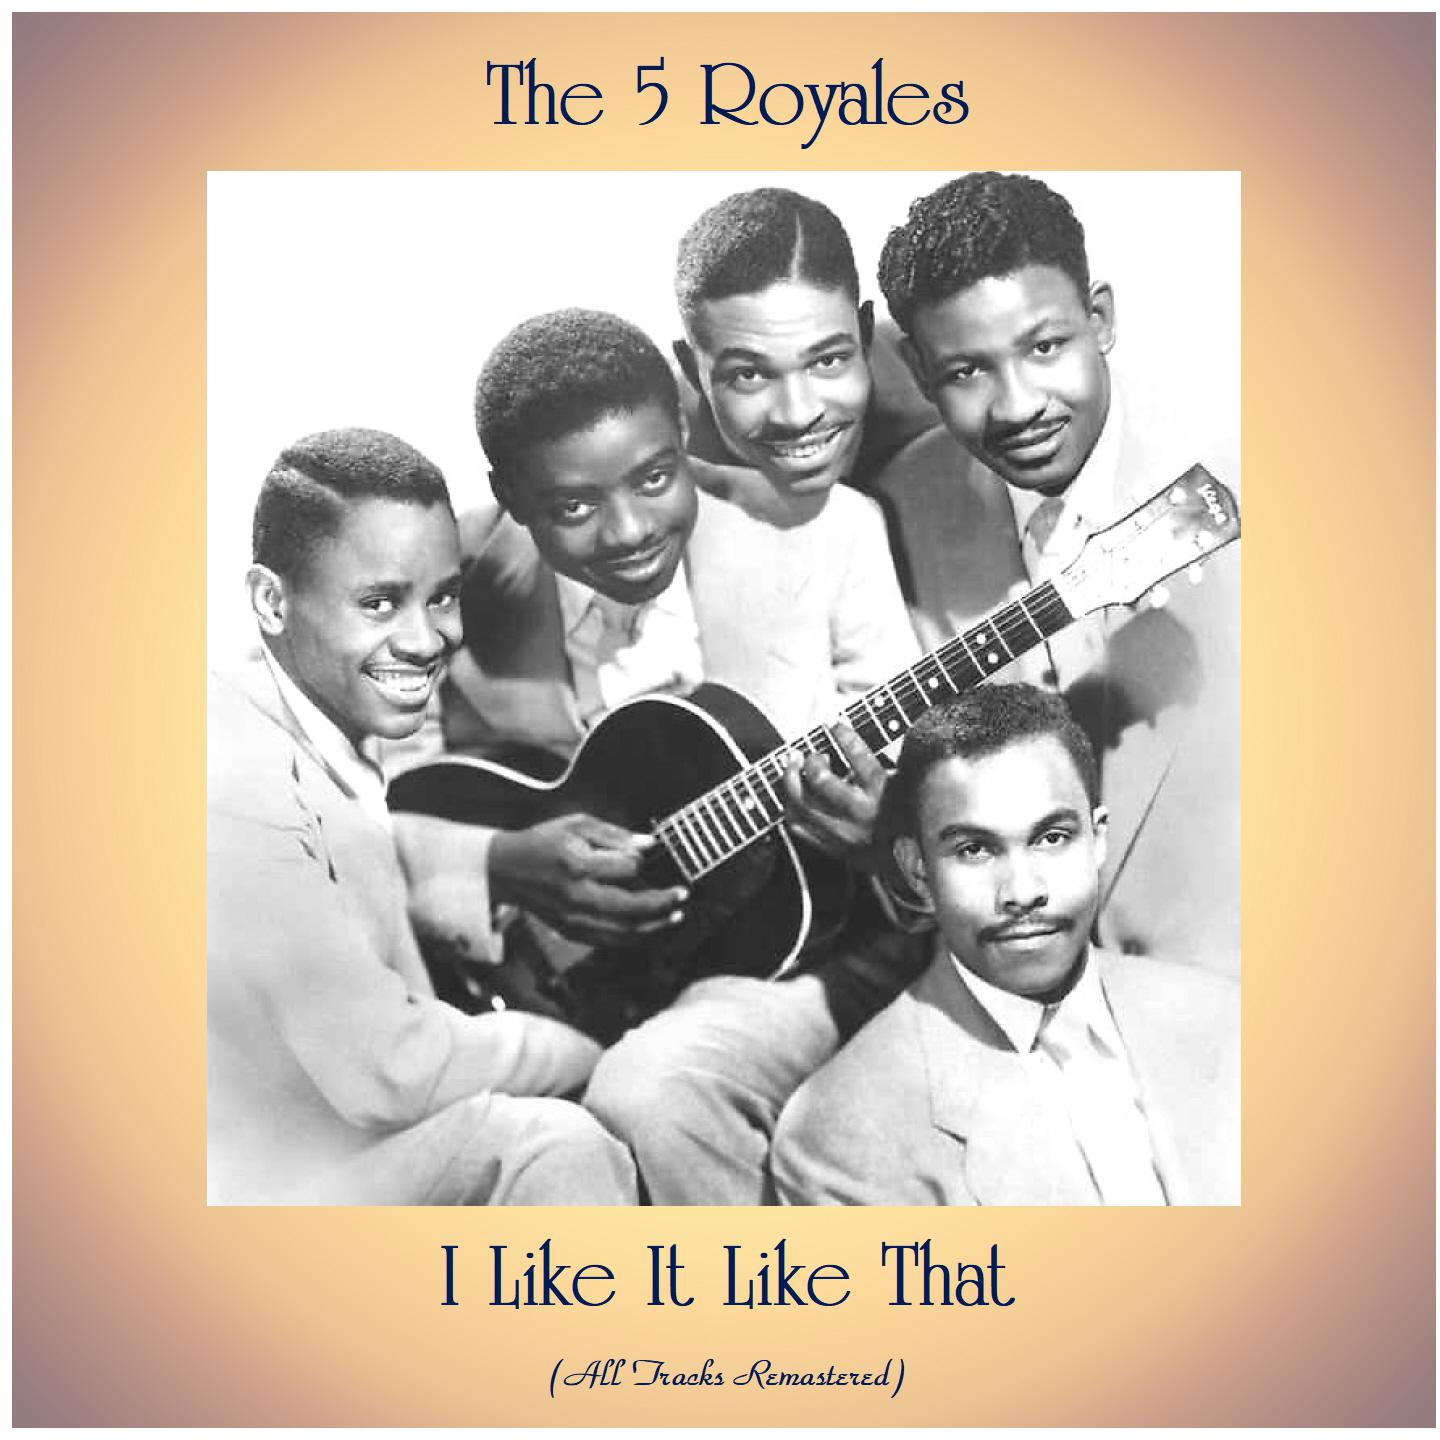 The 5 Royales - Six O'clock In the Morning (Remastered 2021)